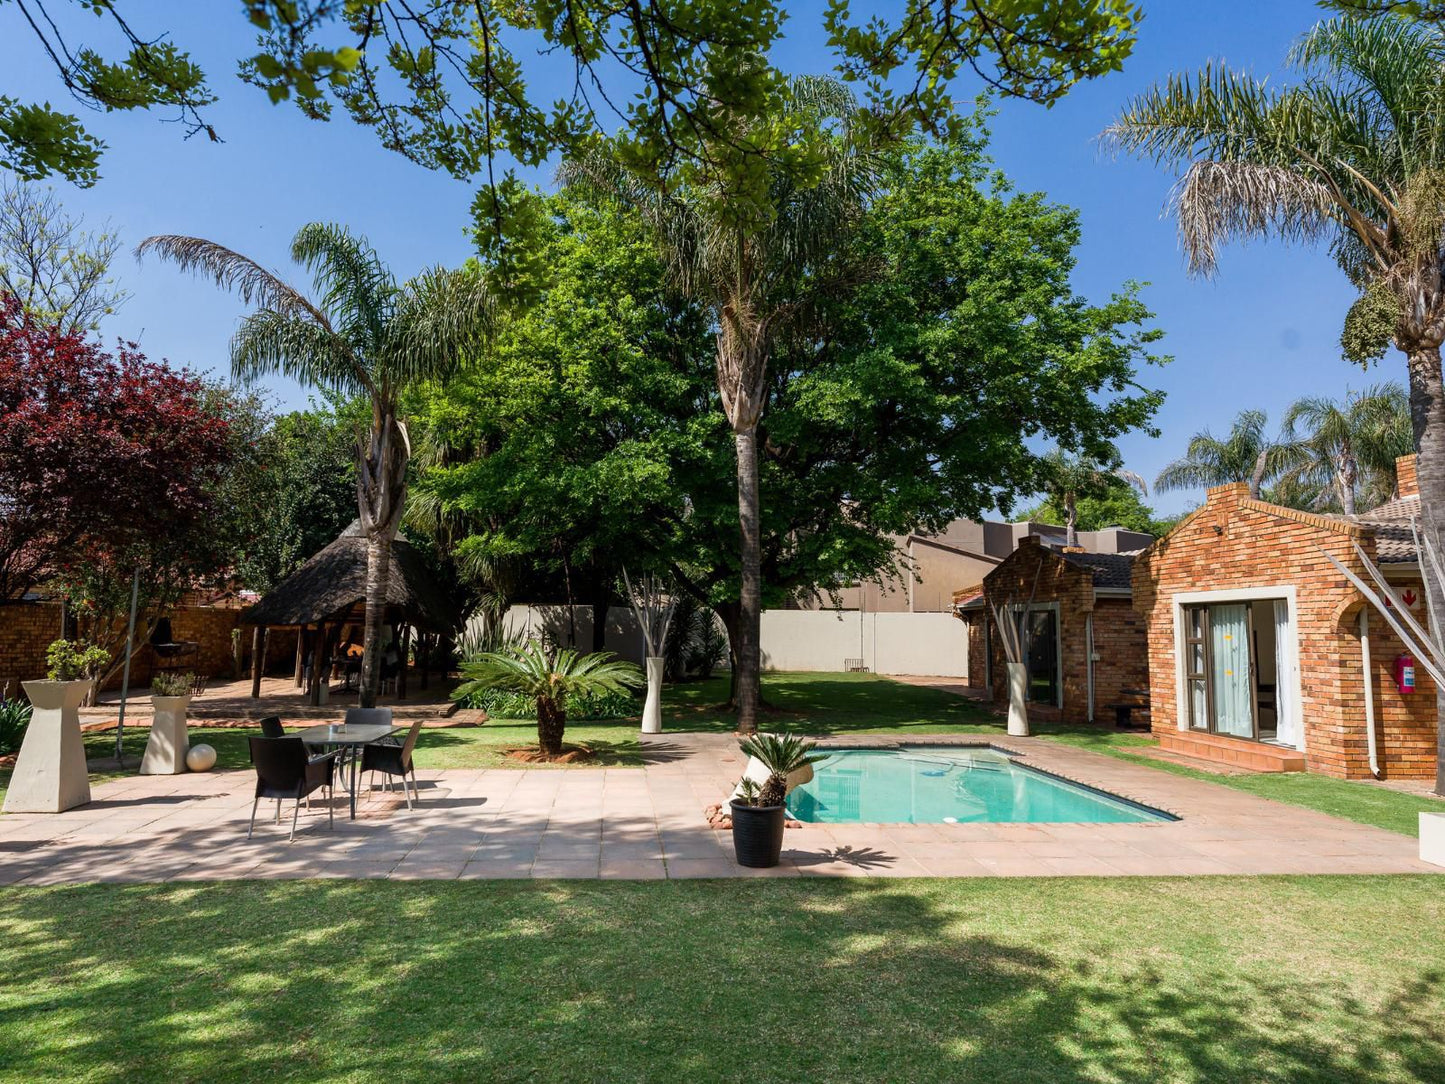 Green Fig Guest House Brakpan Johannesburg Gauteng South Africa Complementary Colors, House, Building, Architecture, Palm Tree, Plant, Nature, Wood, Swimming Pool